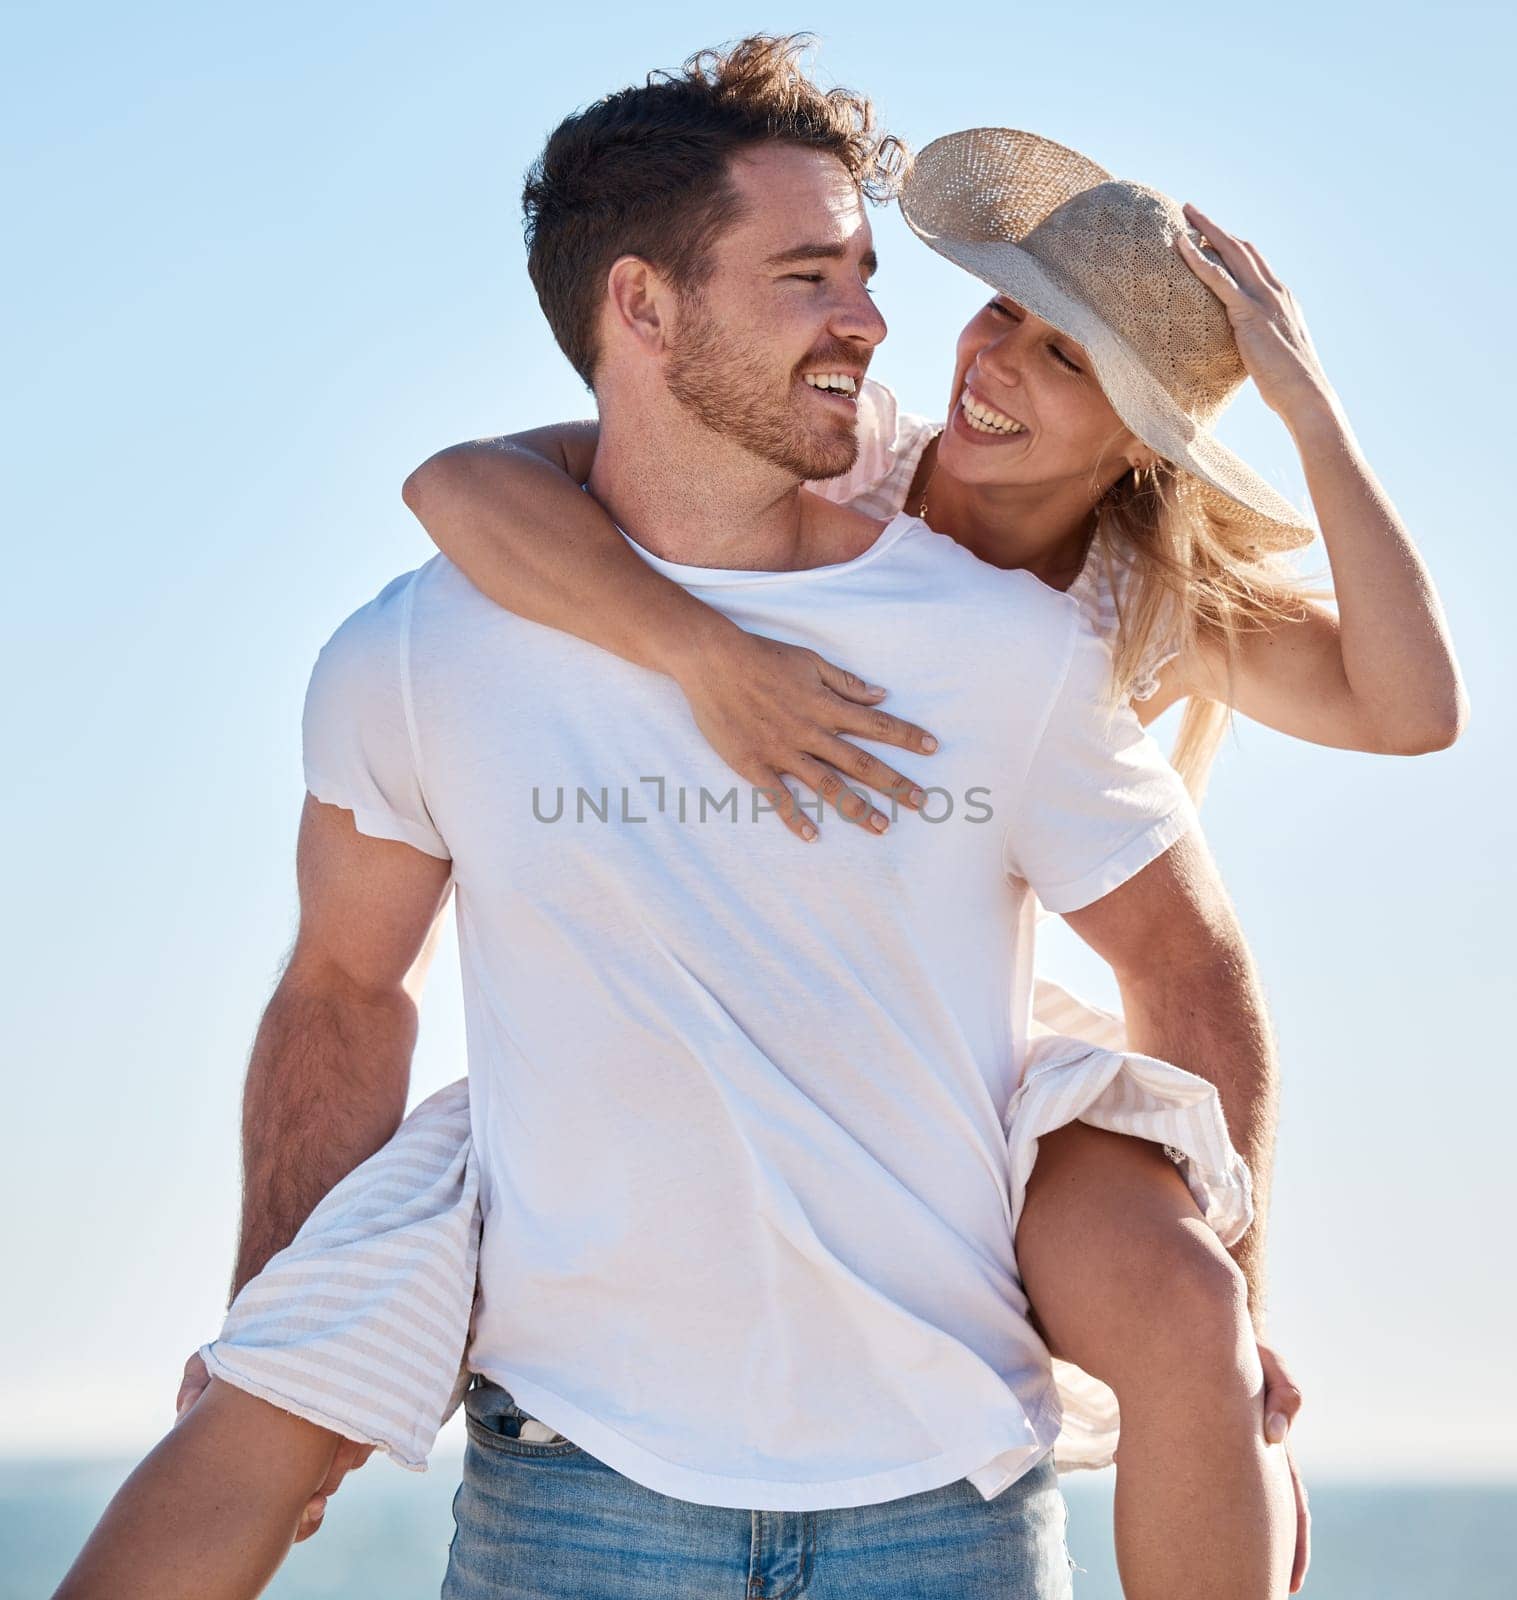 Piggy back, love and couple at a beach for a happy anniversary vacation or honeymoon holiday adventure. Smile, romance and healthy woman enjoys quality time or bonding with a romantic partner at sea.